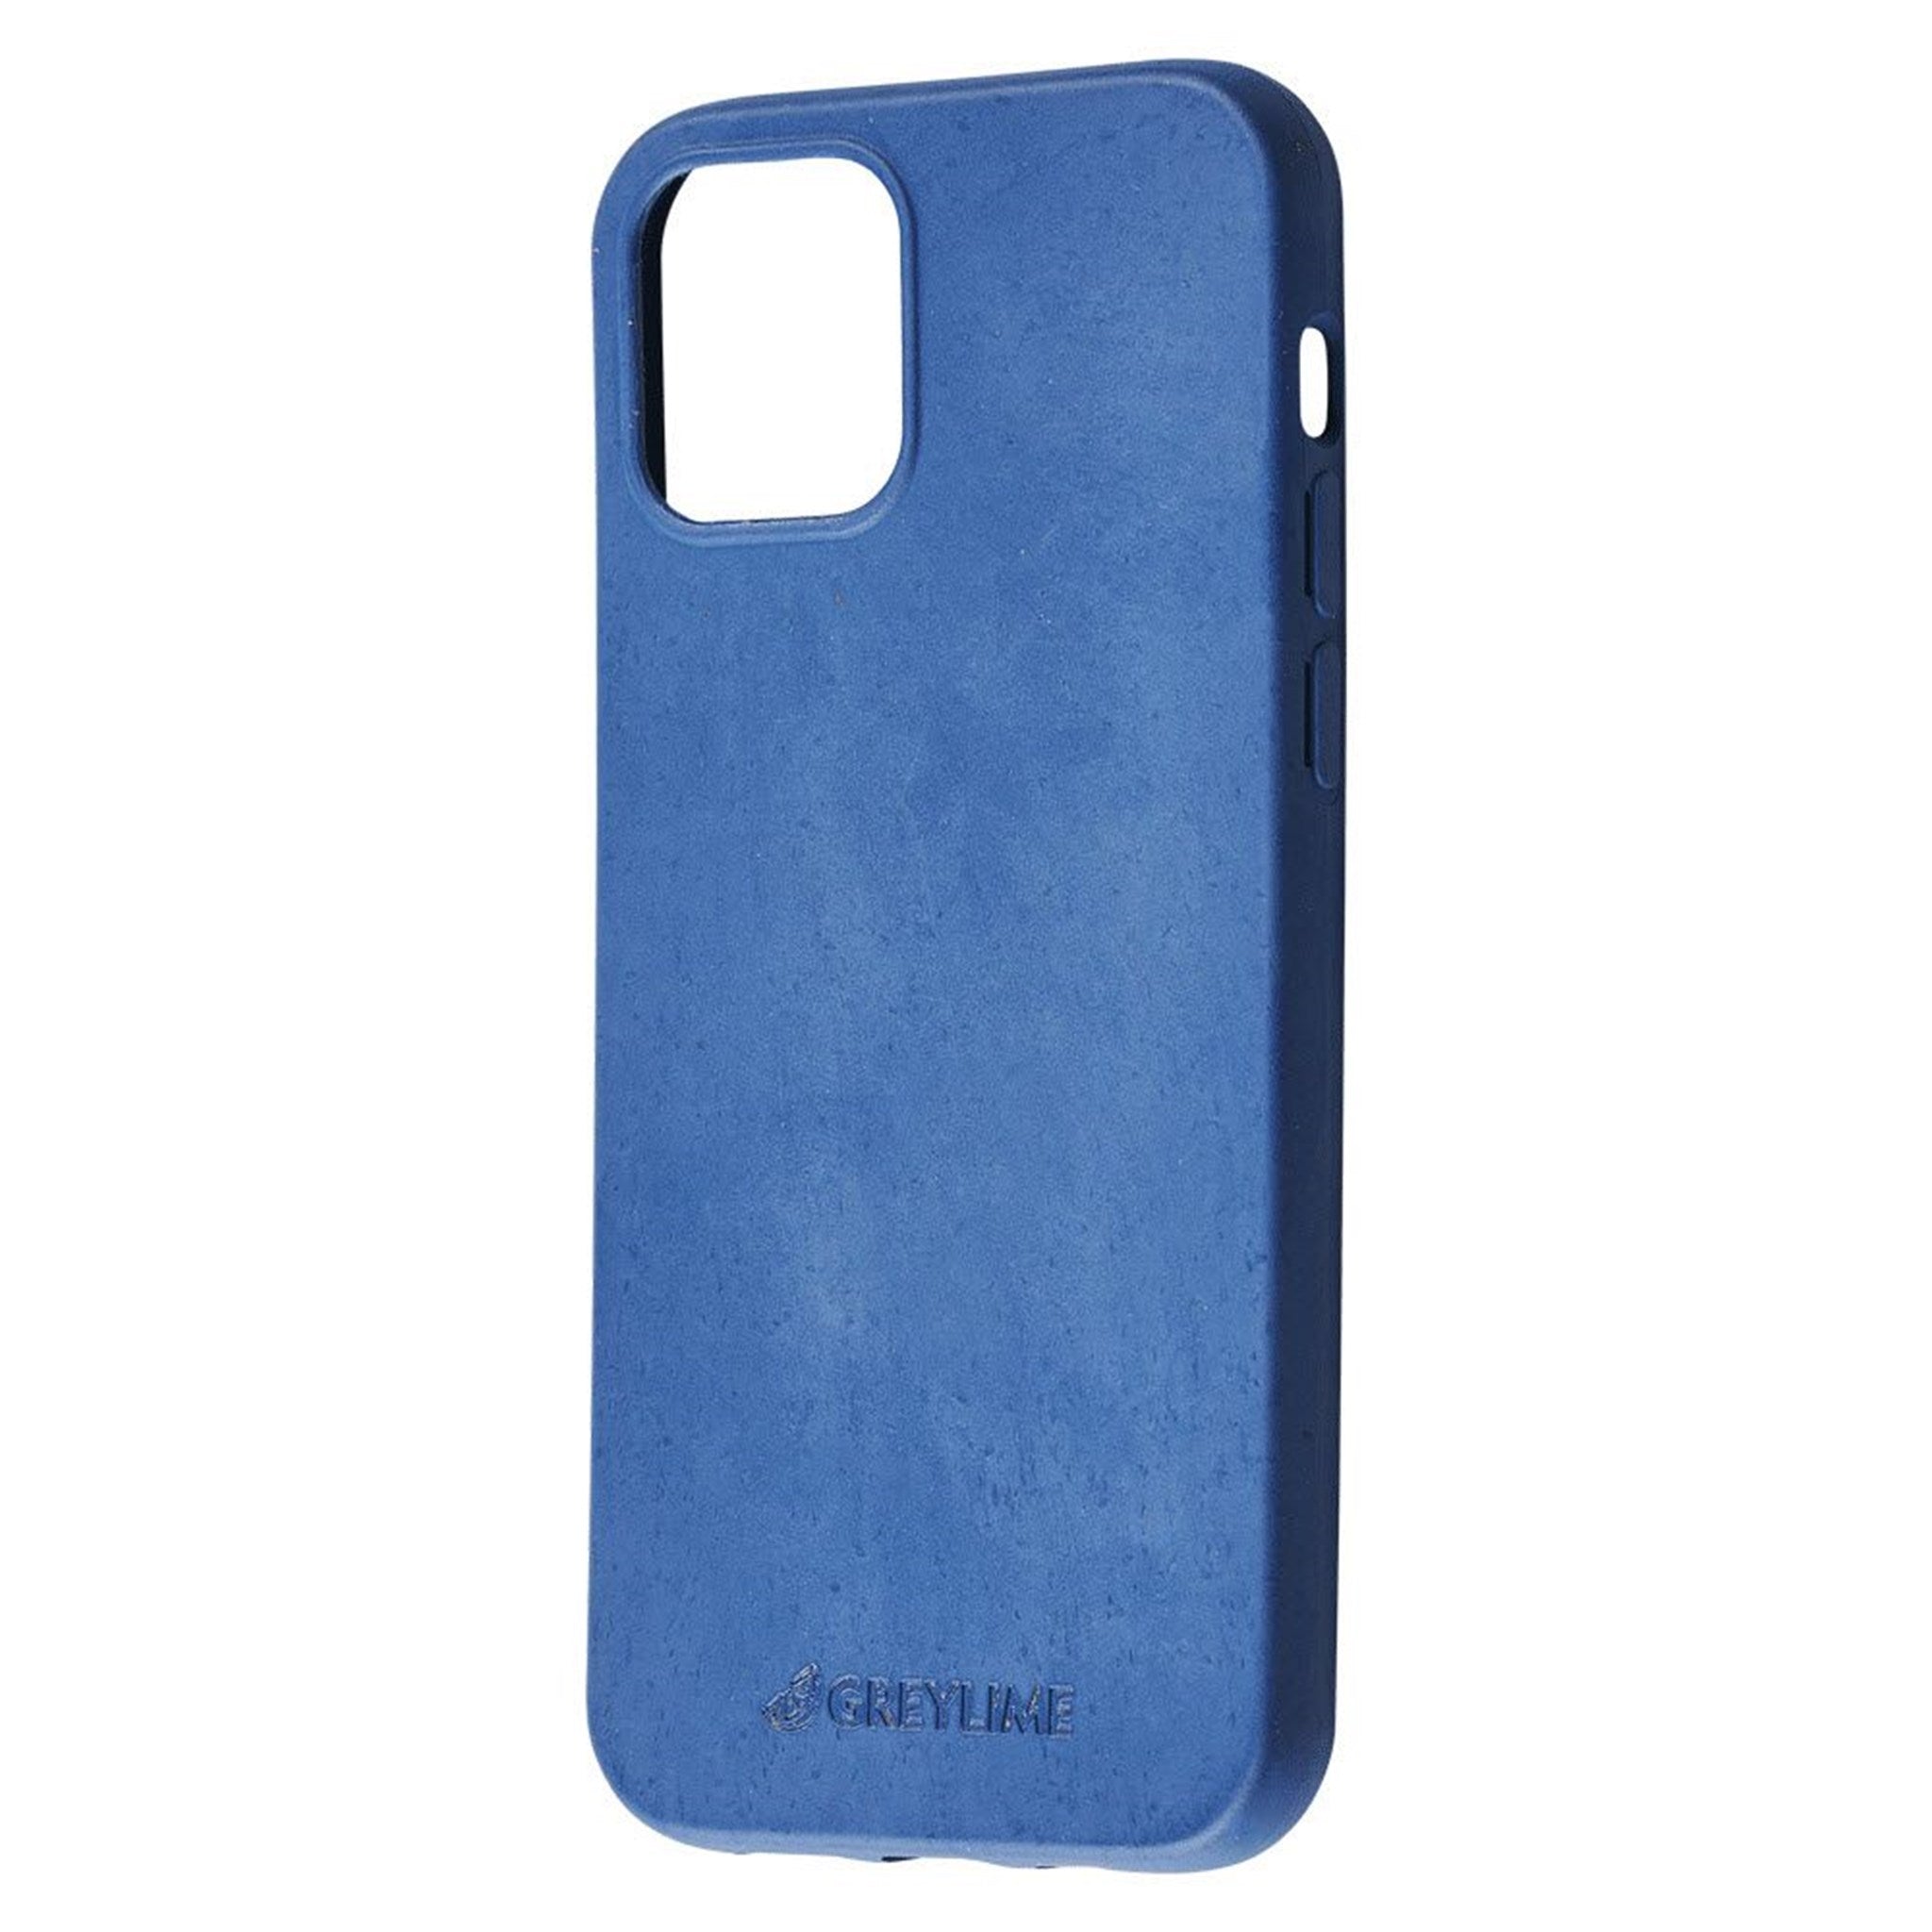 GreyLime-iPhone-12-12-Pro-Biodegdrable-Cover-Navy-Blue-COIP12M03-V2.jpg